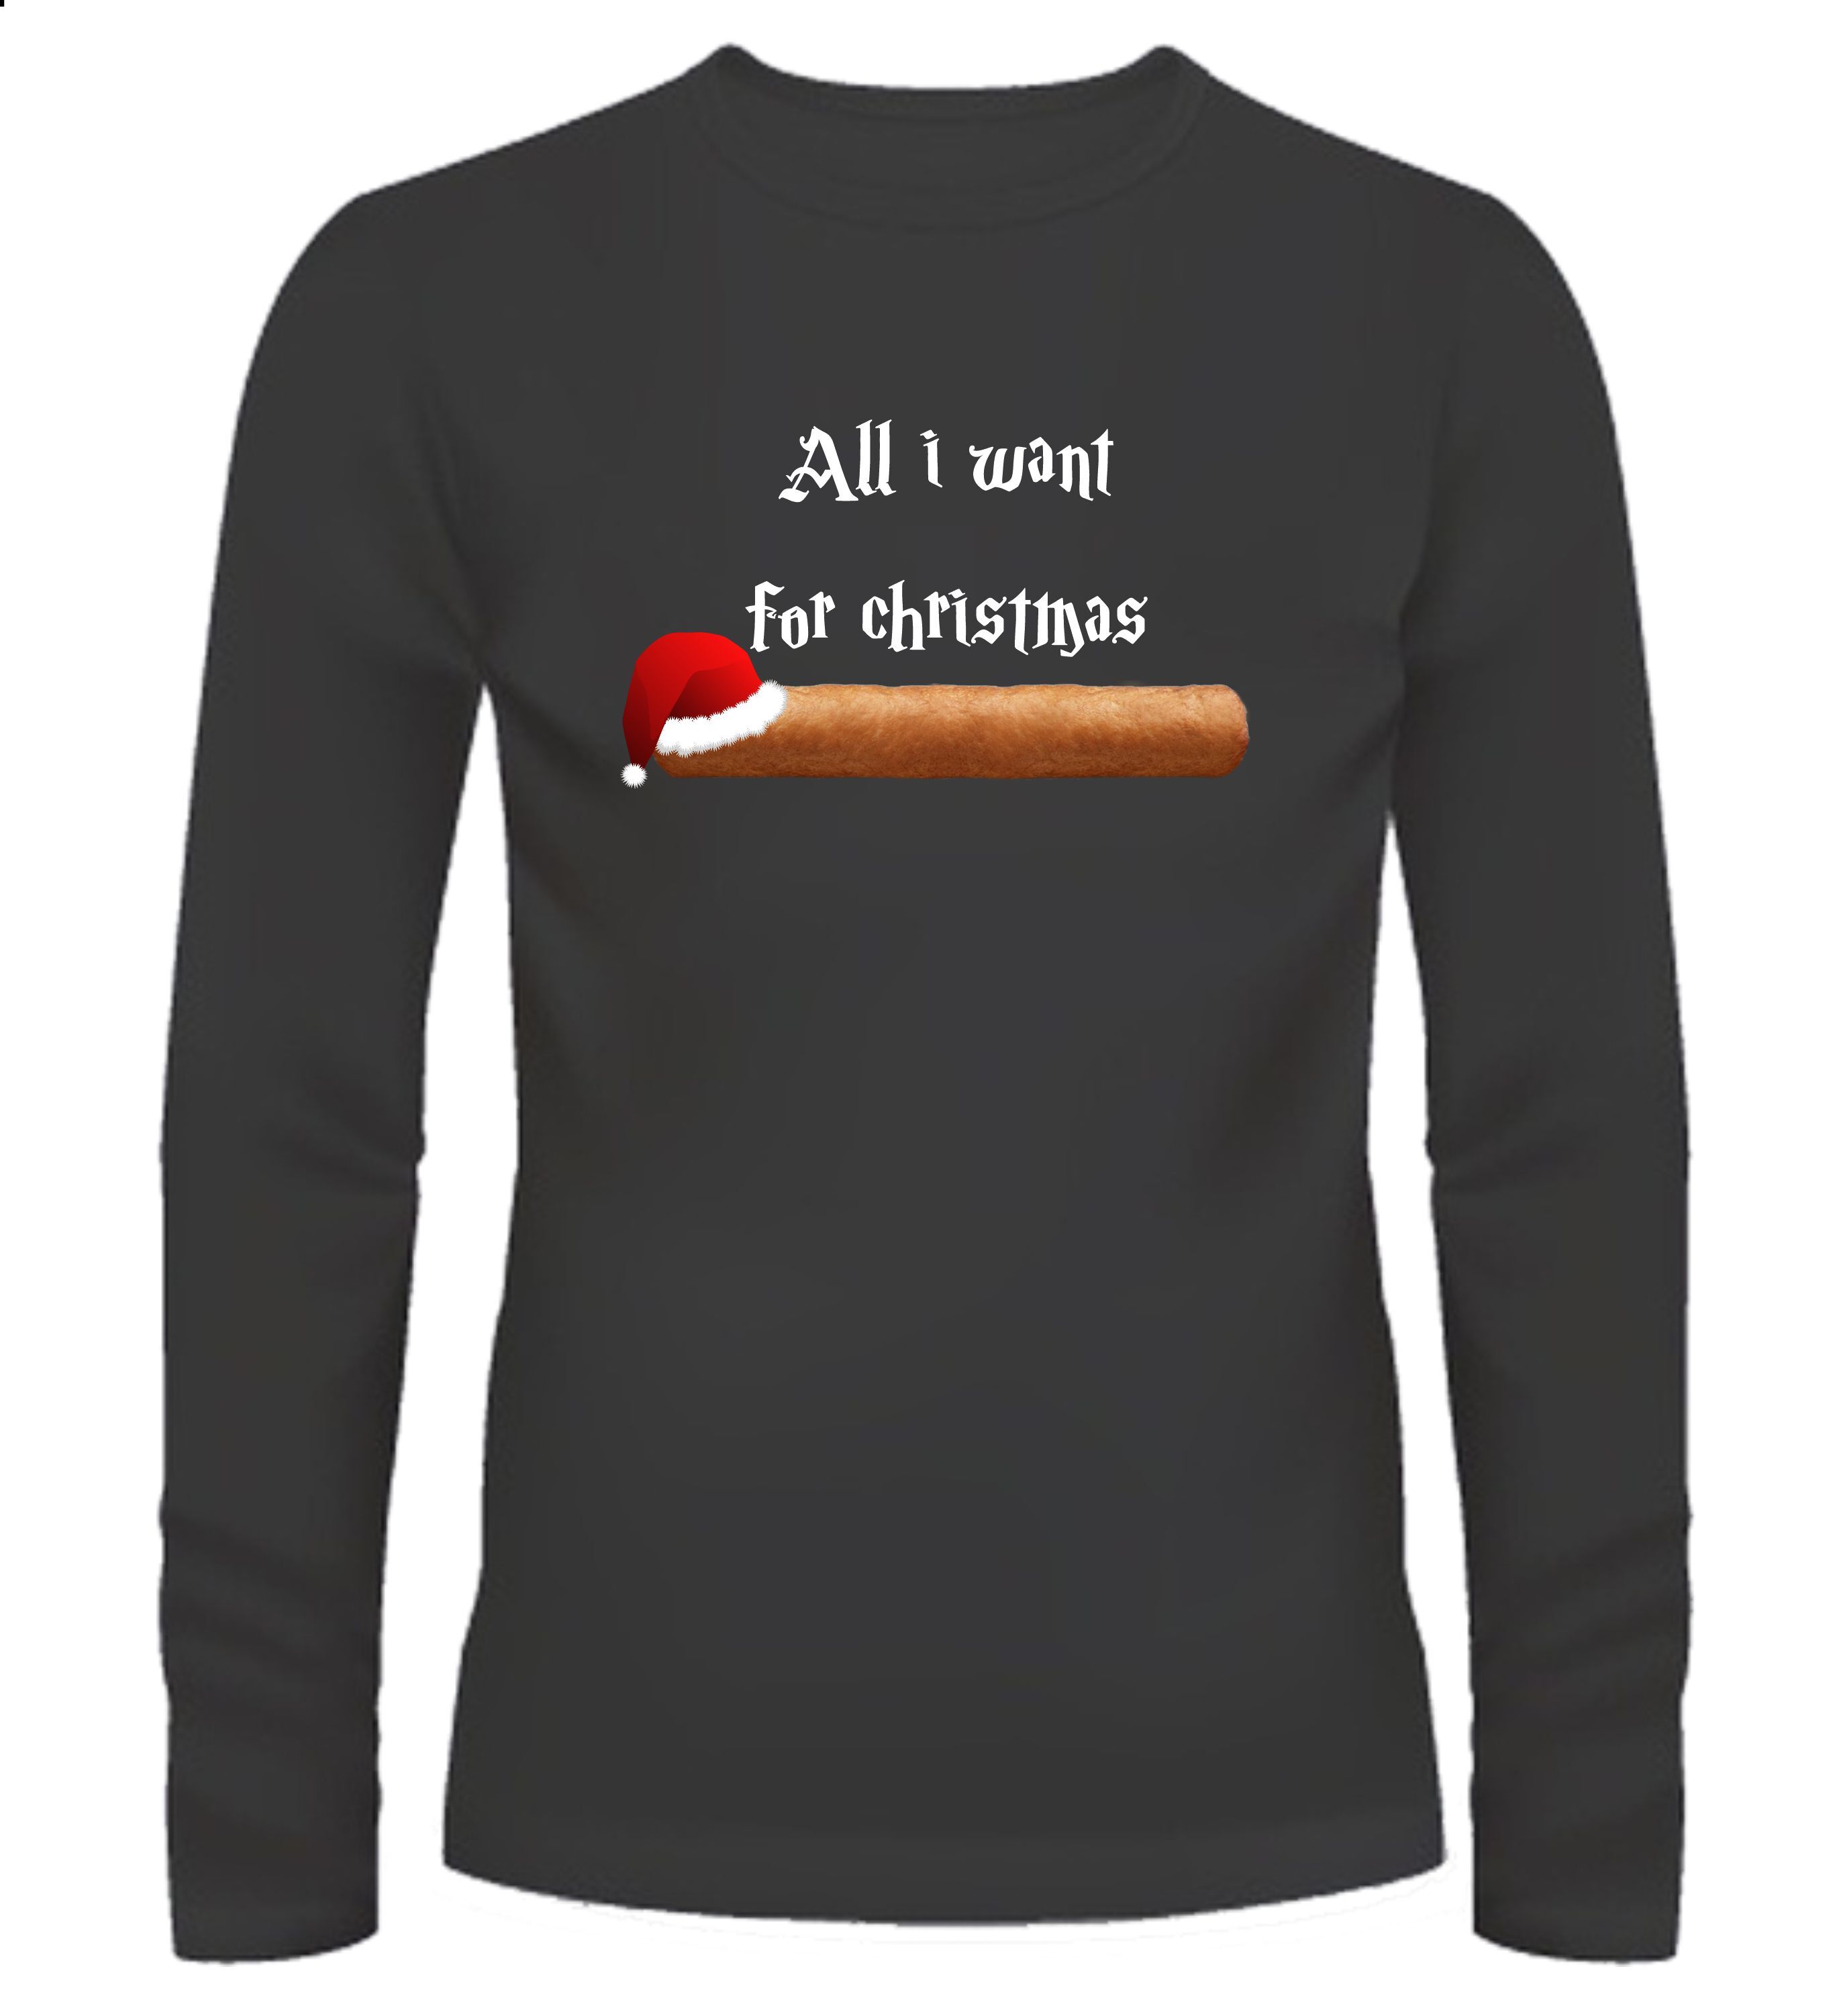 Kerst T-shirt all i want for Christmas is Frikandel! 